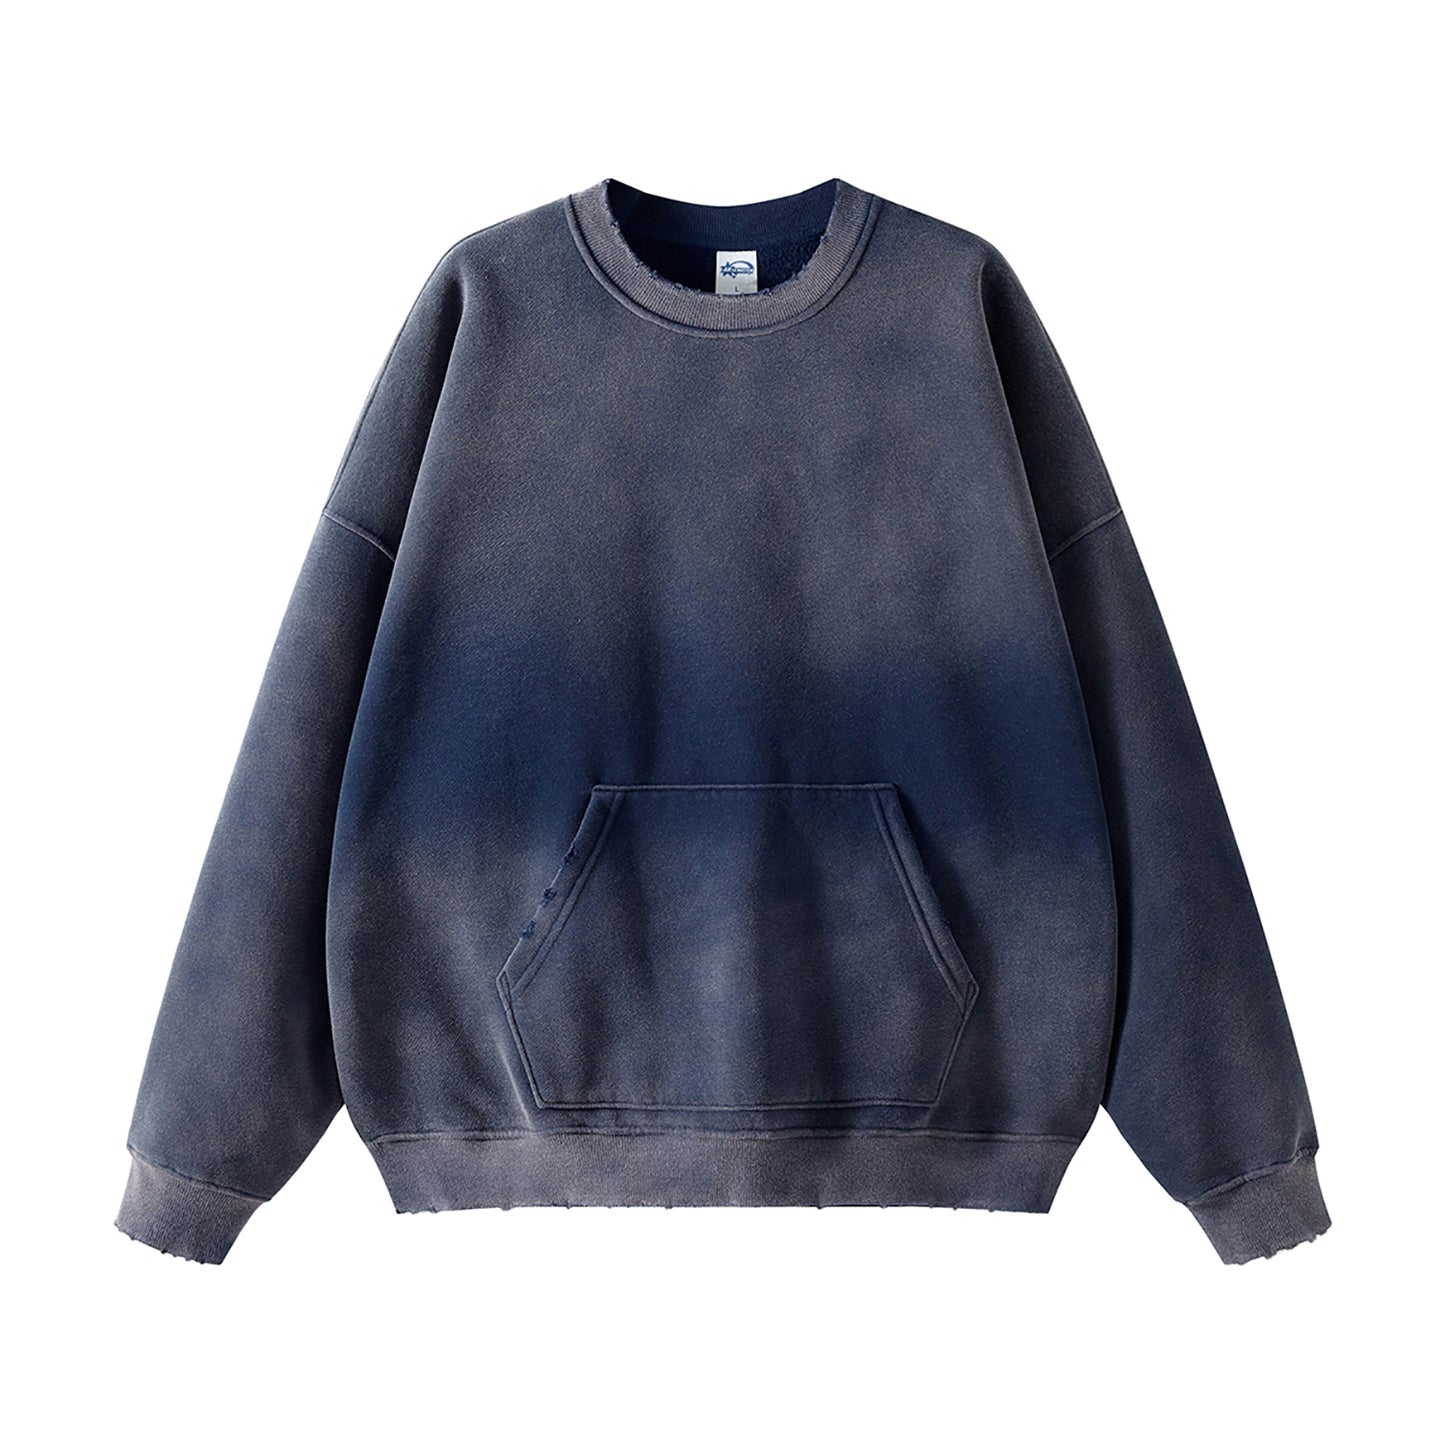 Unisex,Sweatshirt,Casual,Comfort,Pull-Over,Winter,Coffee,MOQ1,Delivery days 5